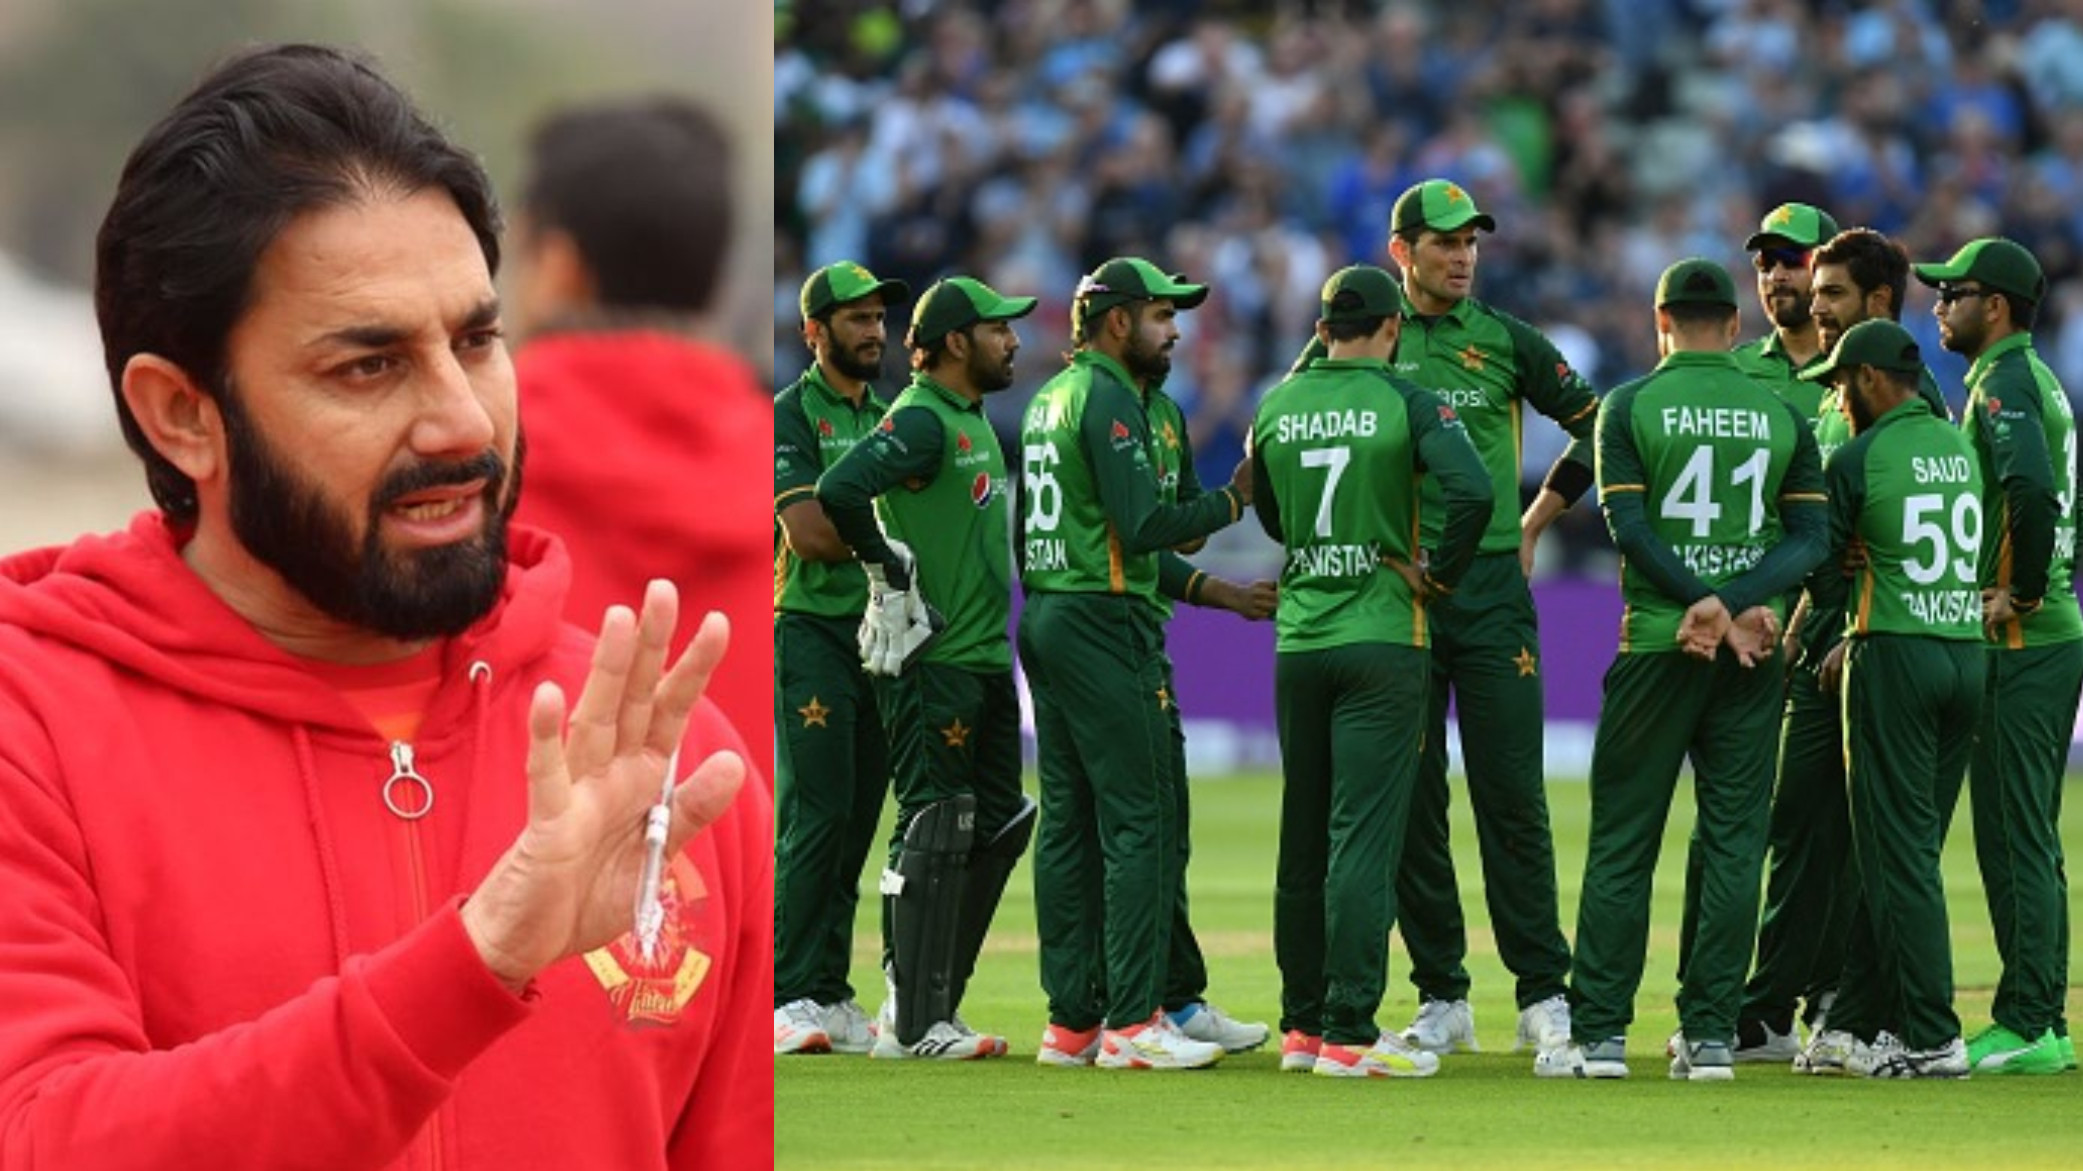 ENG v PAK 2021: Our one team is struggling while India, England have two teams now- Saeed Ajmal slams Pakistan side